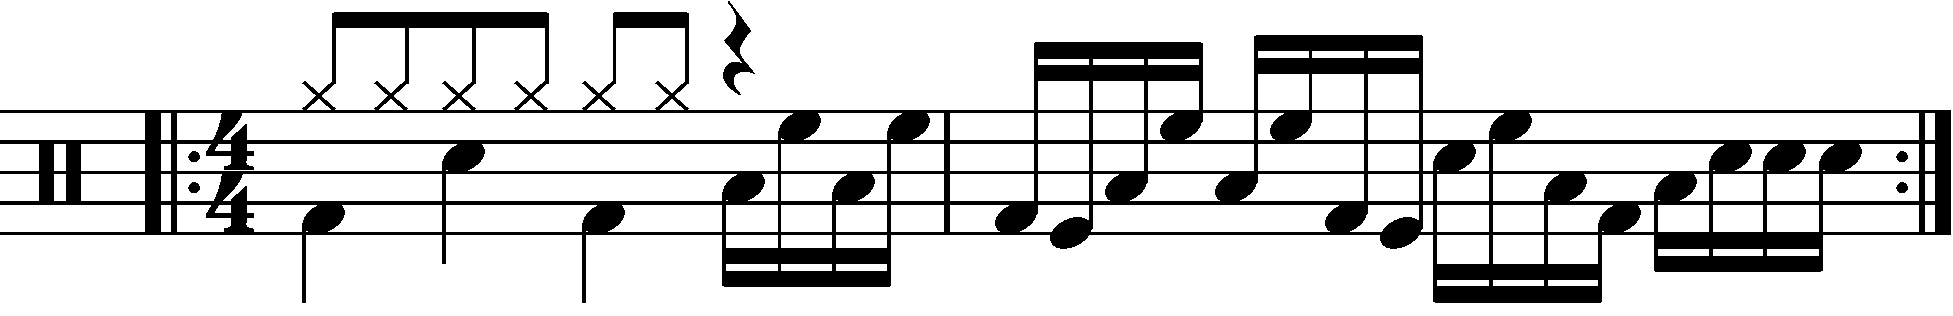 A two bar double kick fill using syncopated grouping.